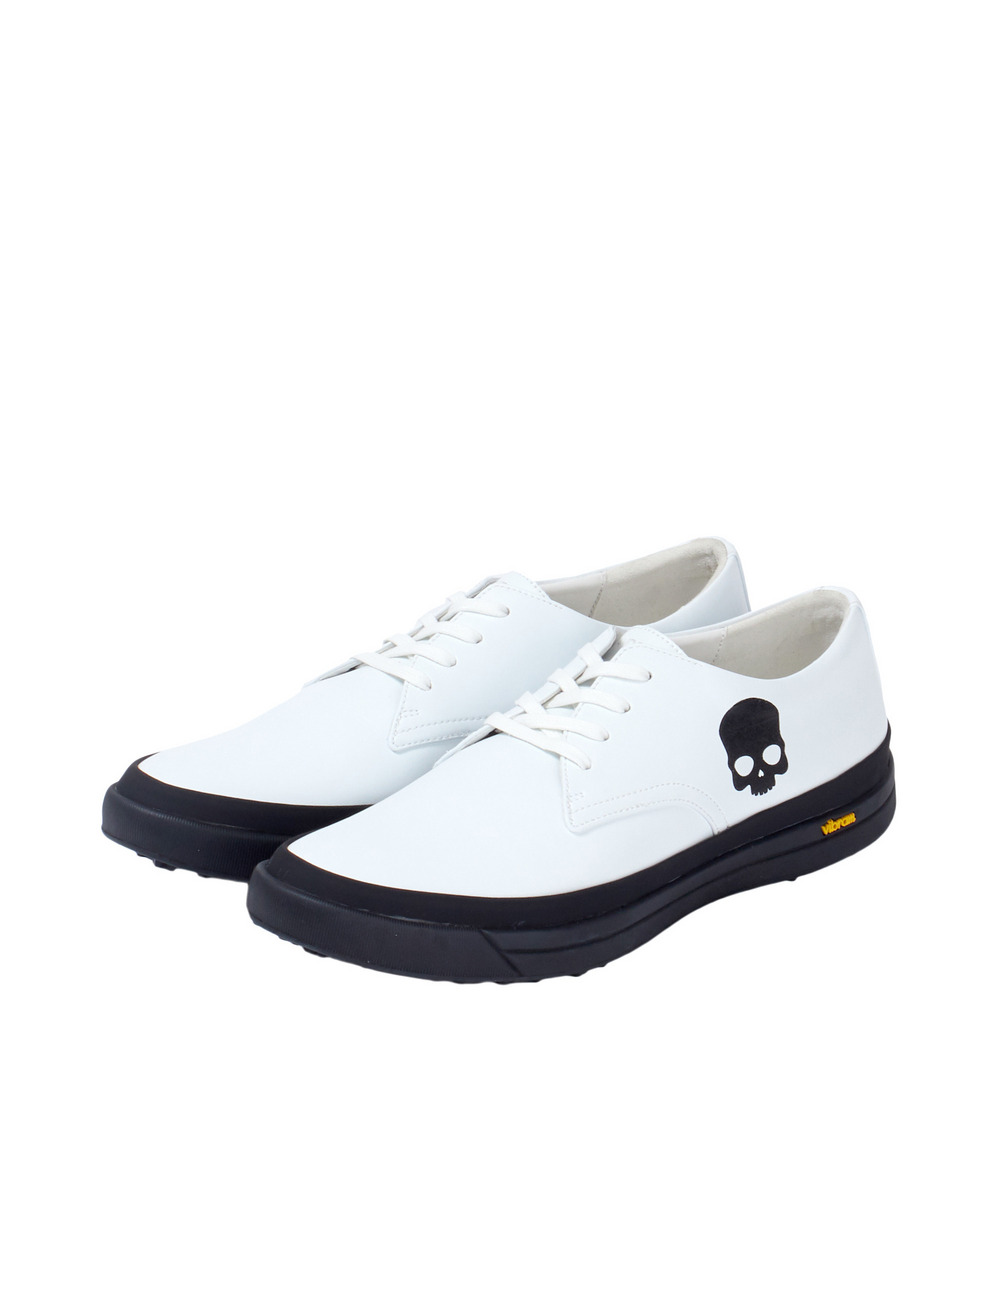 【AND THE CUP by HYDROGEN】ゴルフシューズ(プレーントゥ)/【AND THE CUP by HYDROGEN】GOLF SHOES(PLAIN TOE) 詳細画像 ブラック 12